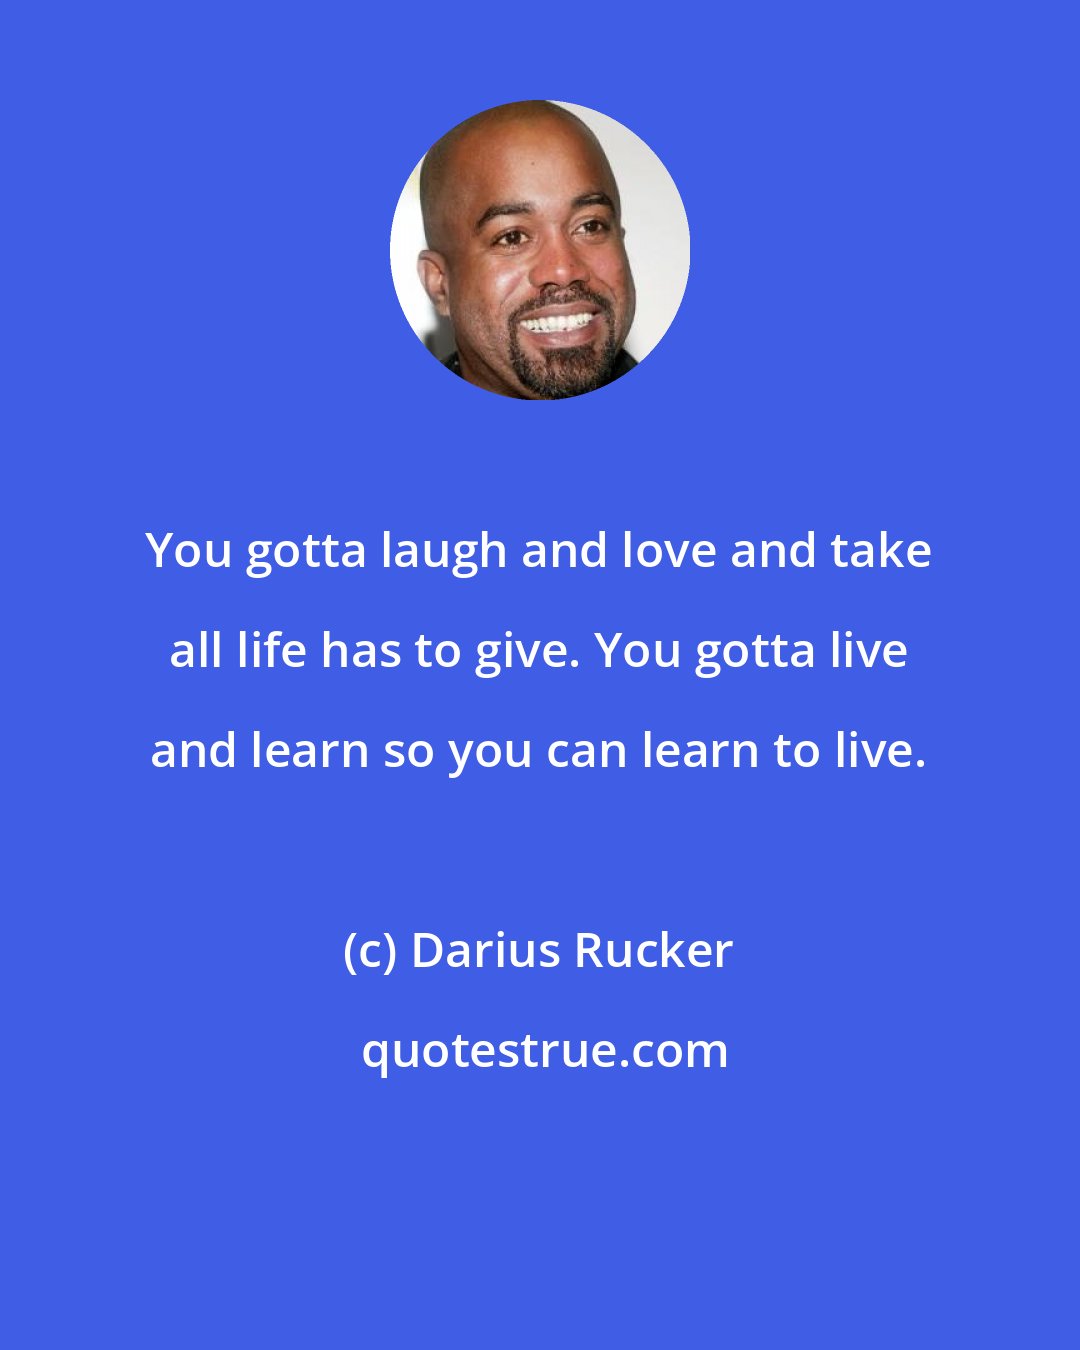 Darius Rucker: You gotta laugh and love and take all life has to give. You gotta live and learn so you can learn to live.